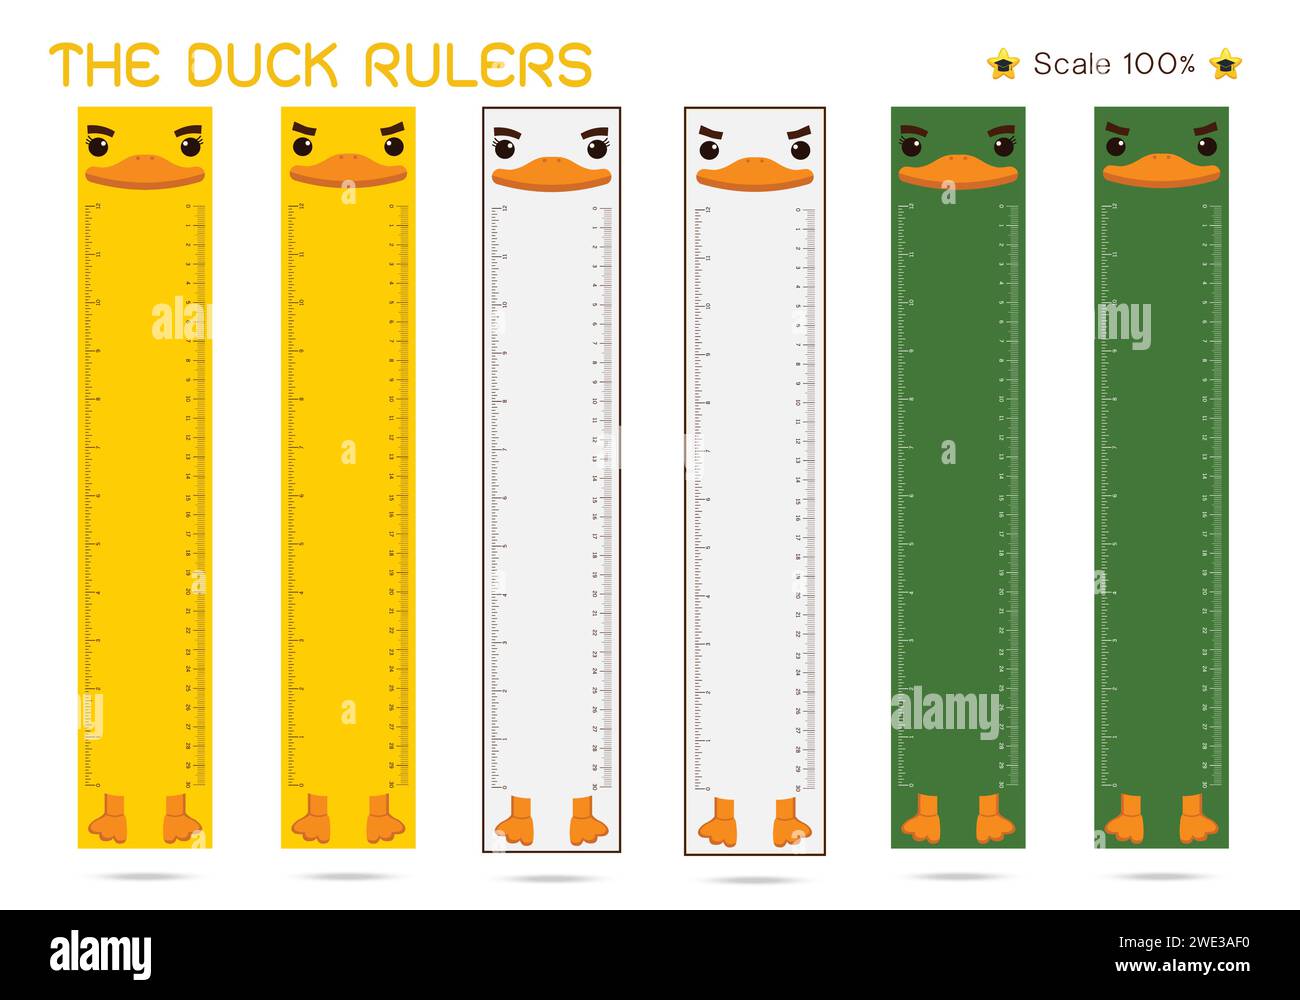 Duck of Rulers Inch and metric rulers. Scale for a ruler in inches and centimeters. Centimeters and inches measuring scale cm metrics indicator. Inch Stock Vector